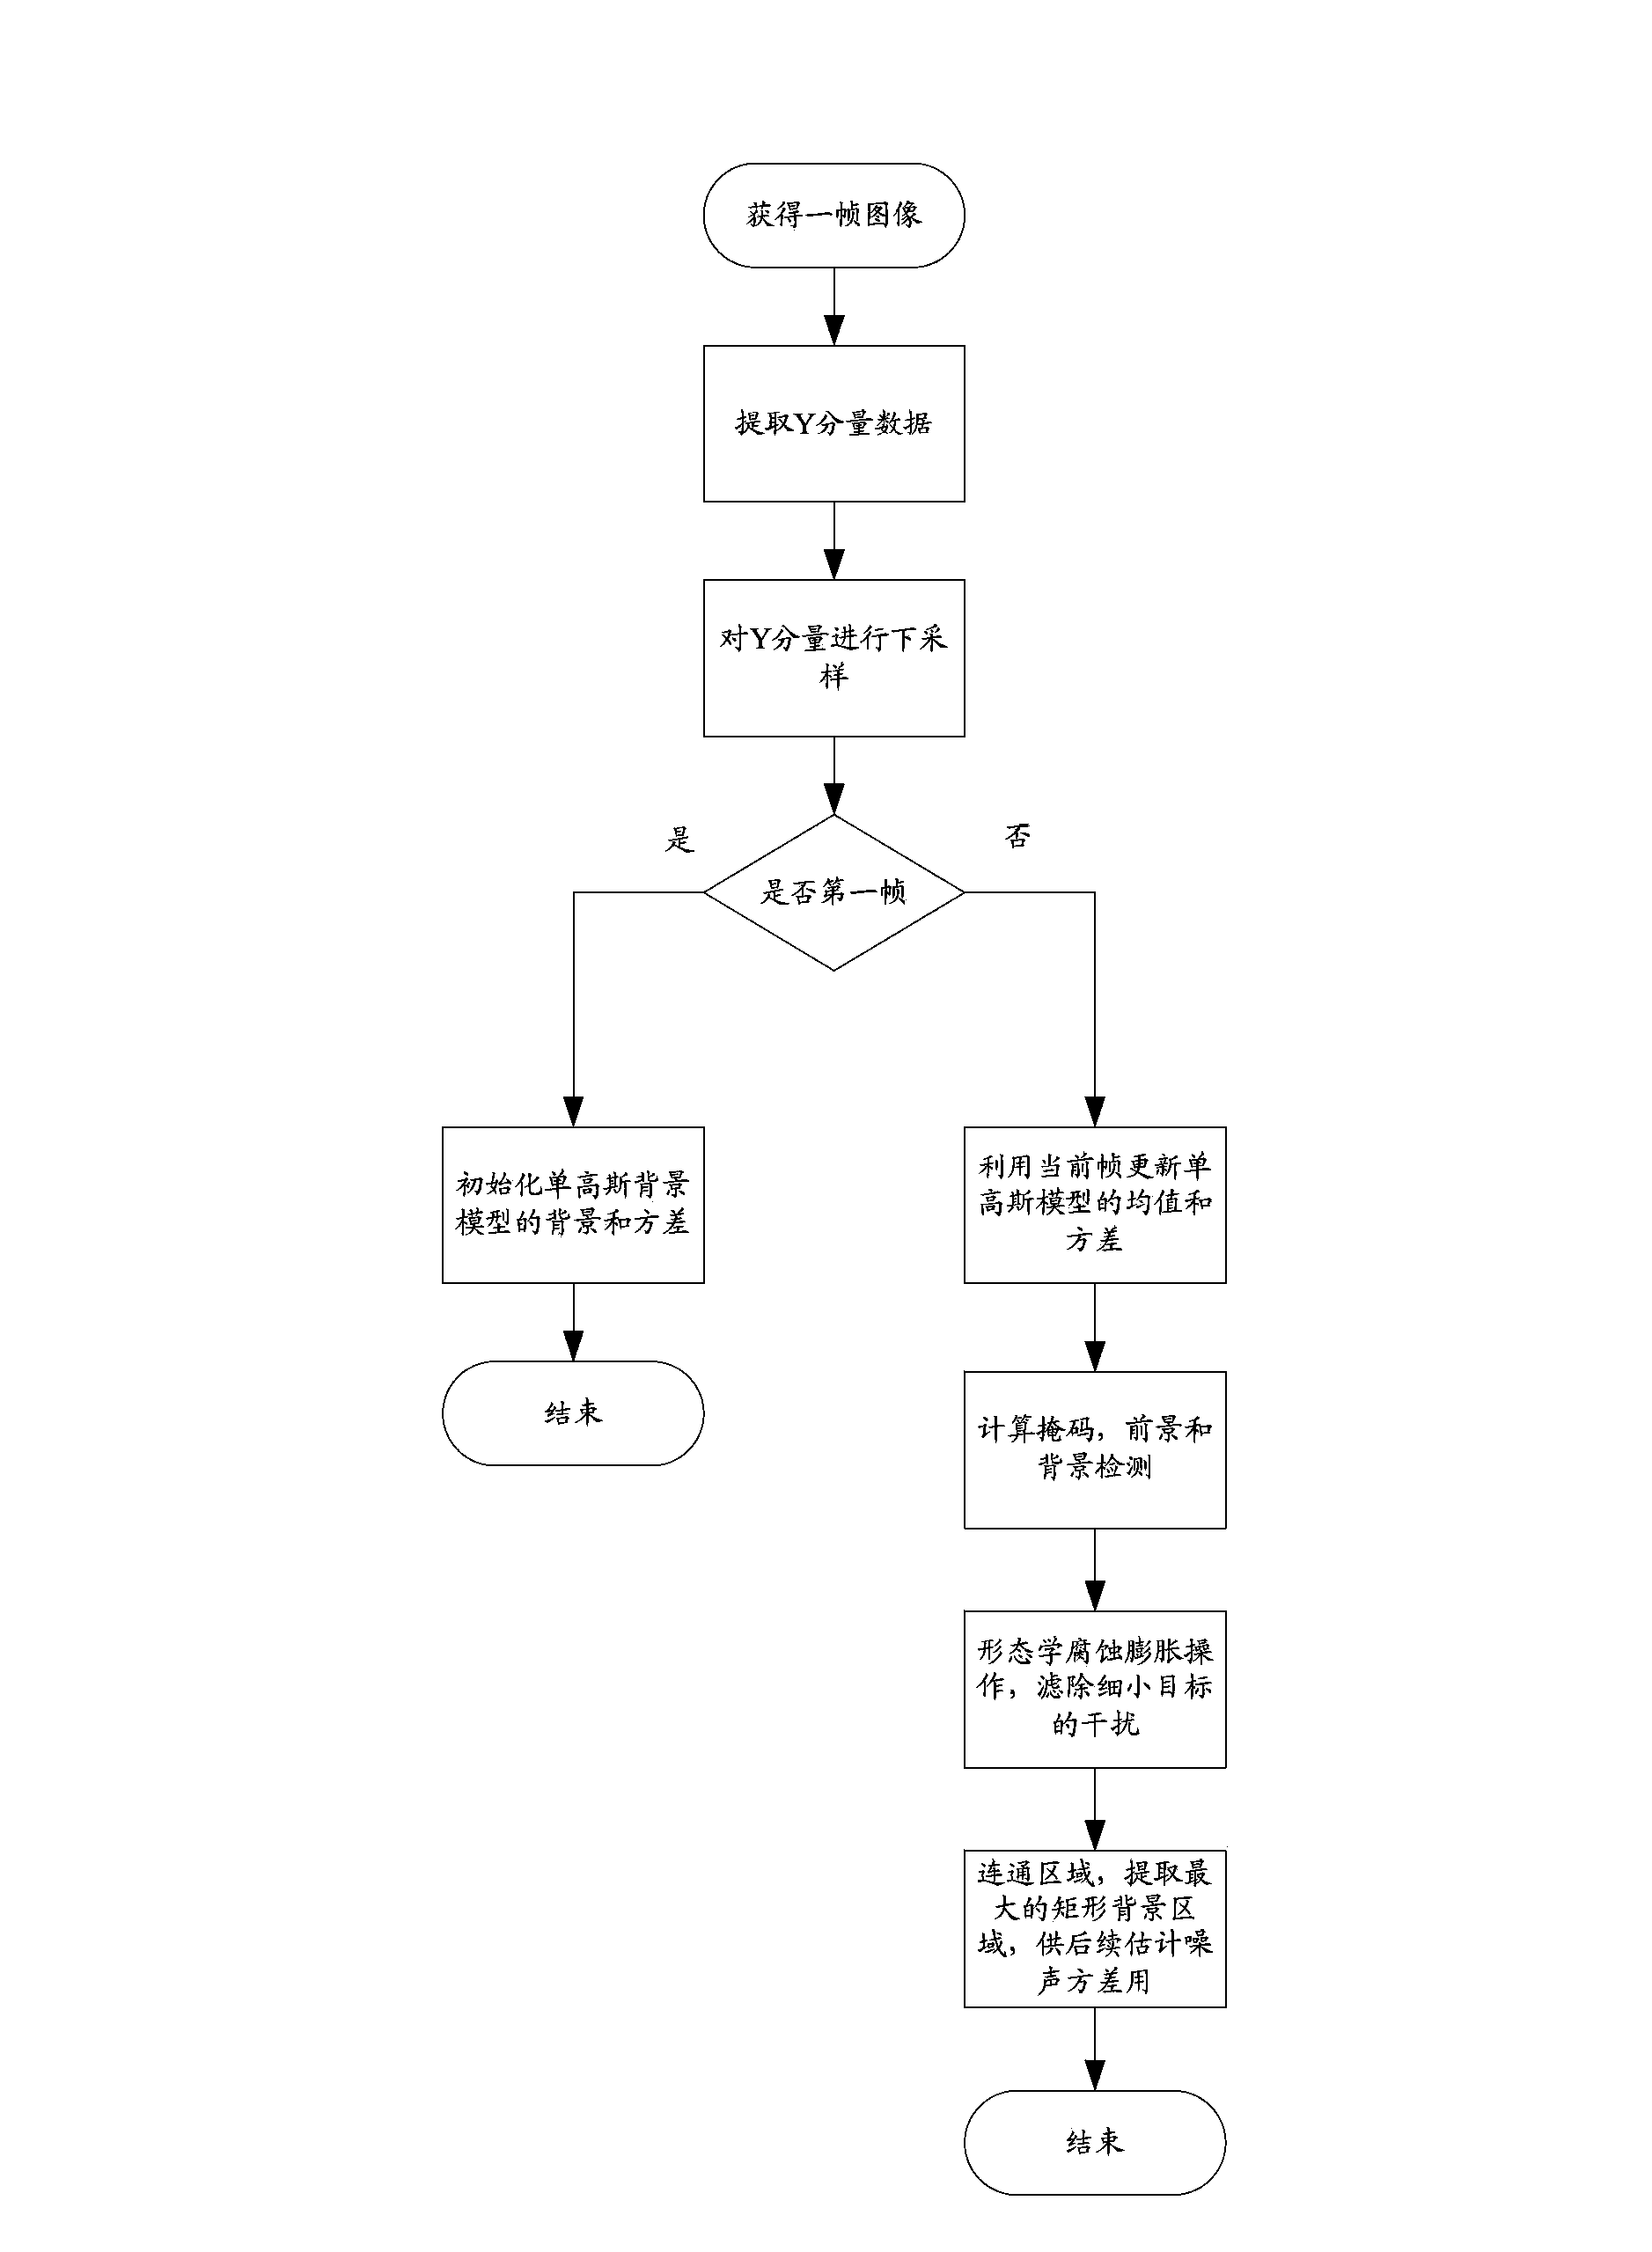 Video denoising processing method and device based on fixed scene